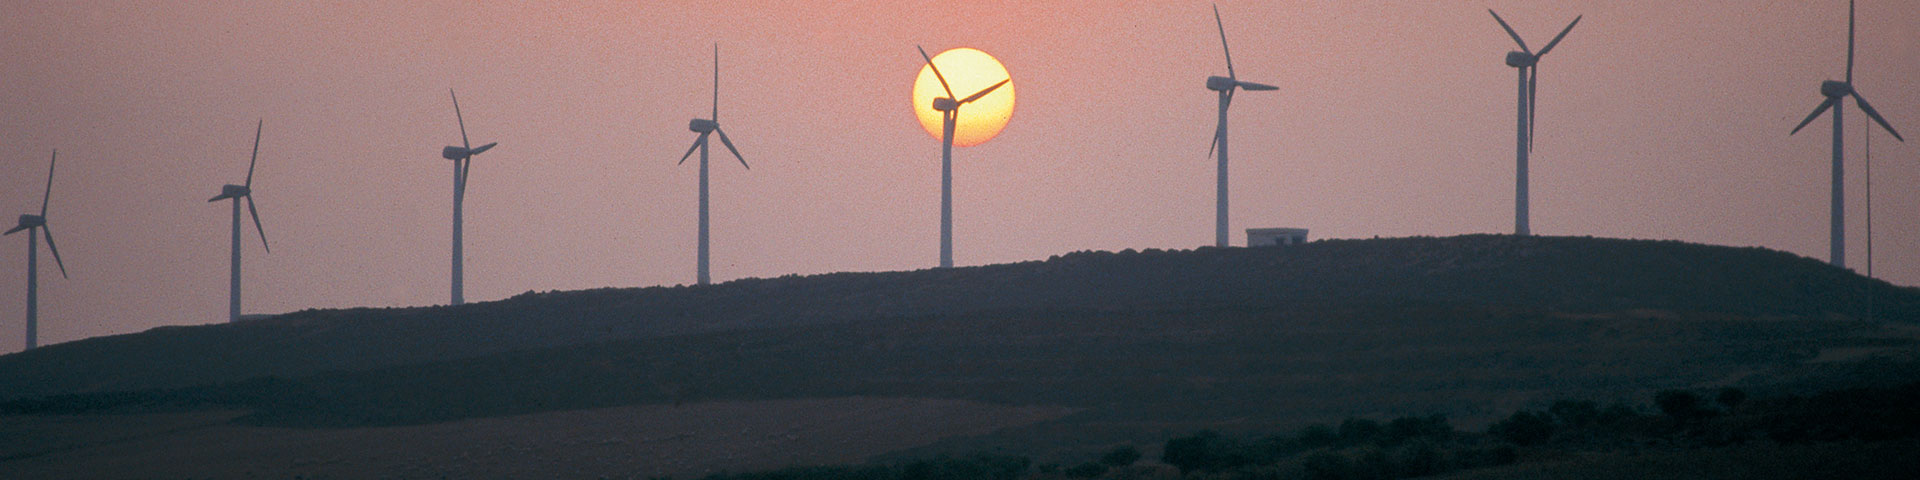 A row of wind turbines stands on a hill at dusk.